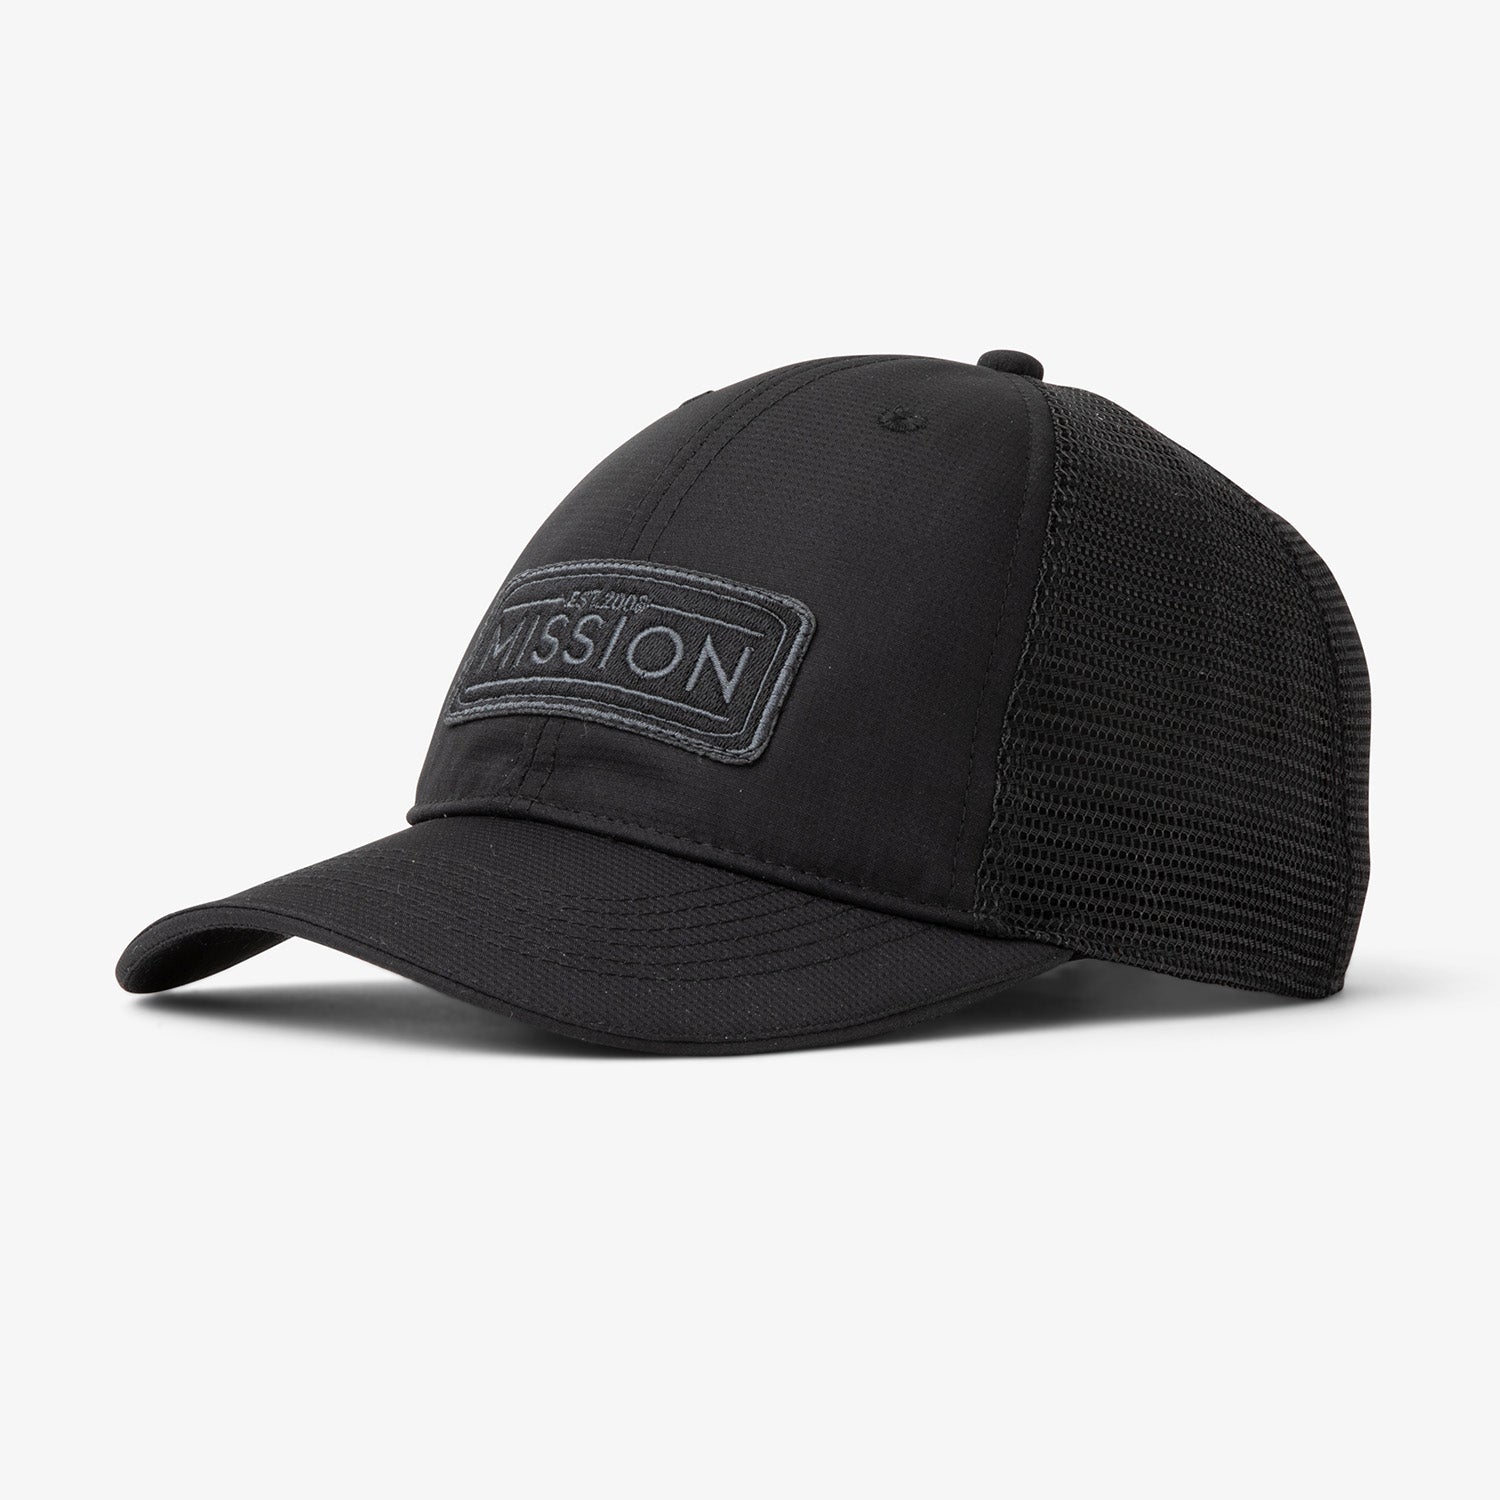 Cooling Westchester Hat Caps MISSION One Size Midnight 